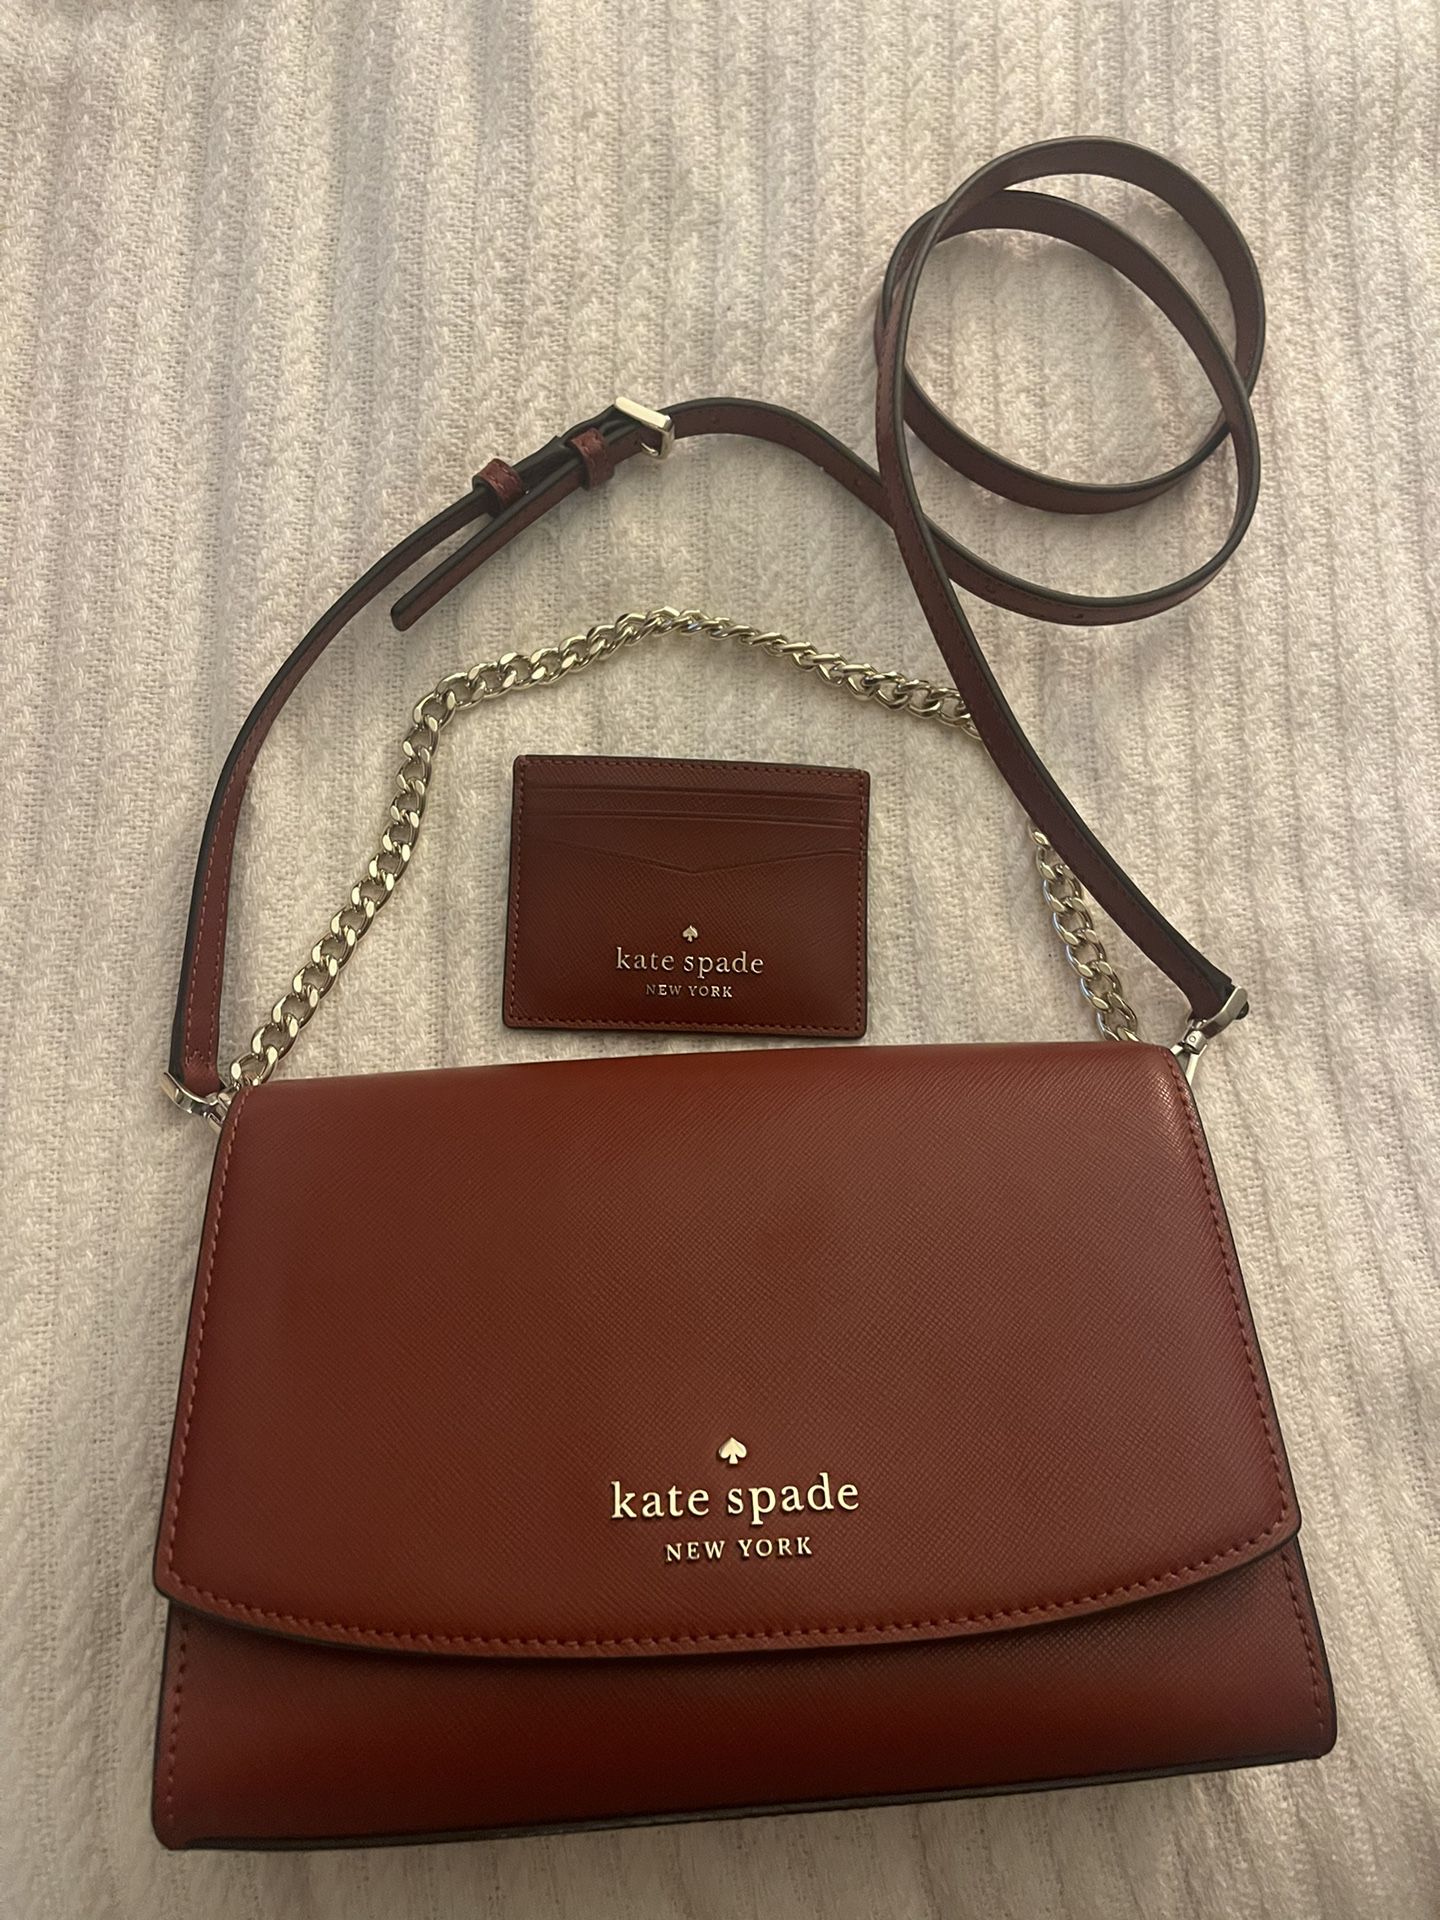 Knock Of Purses & Wallet For Sale Brand New for Sale in Ventura, CA